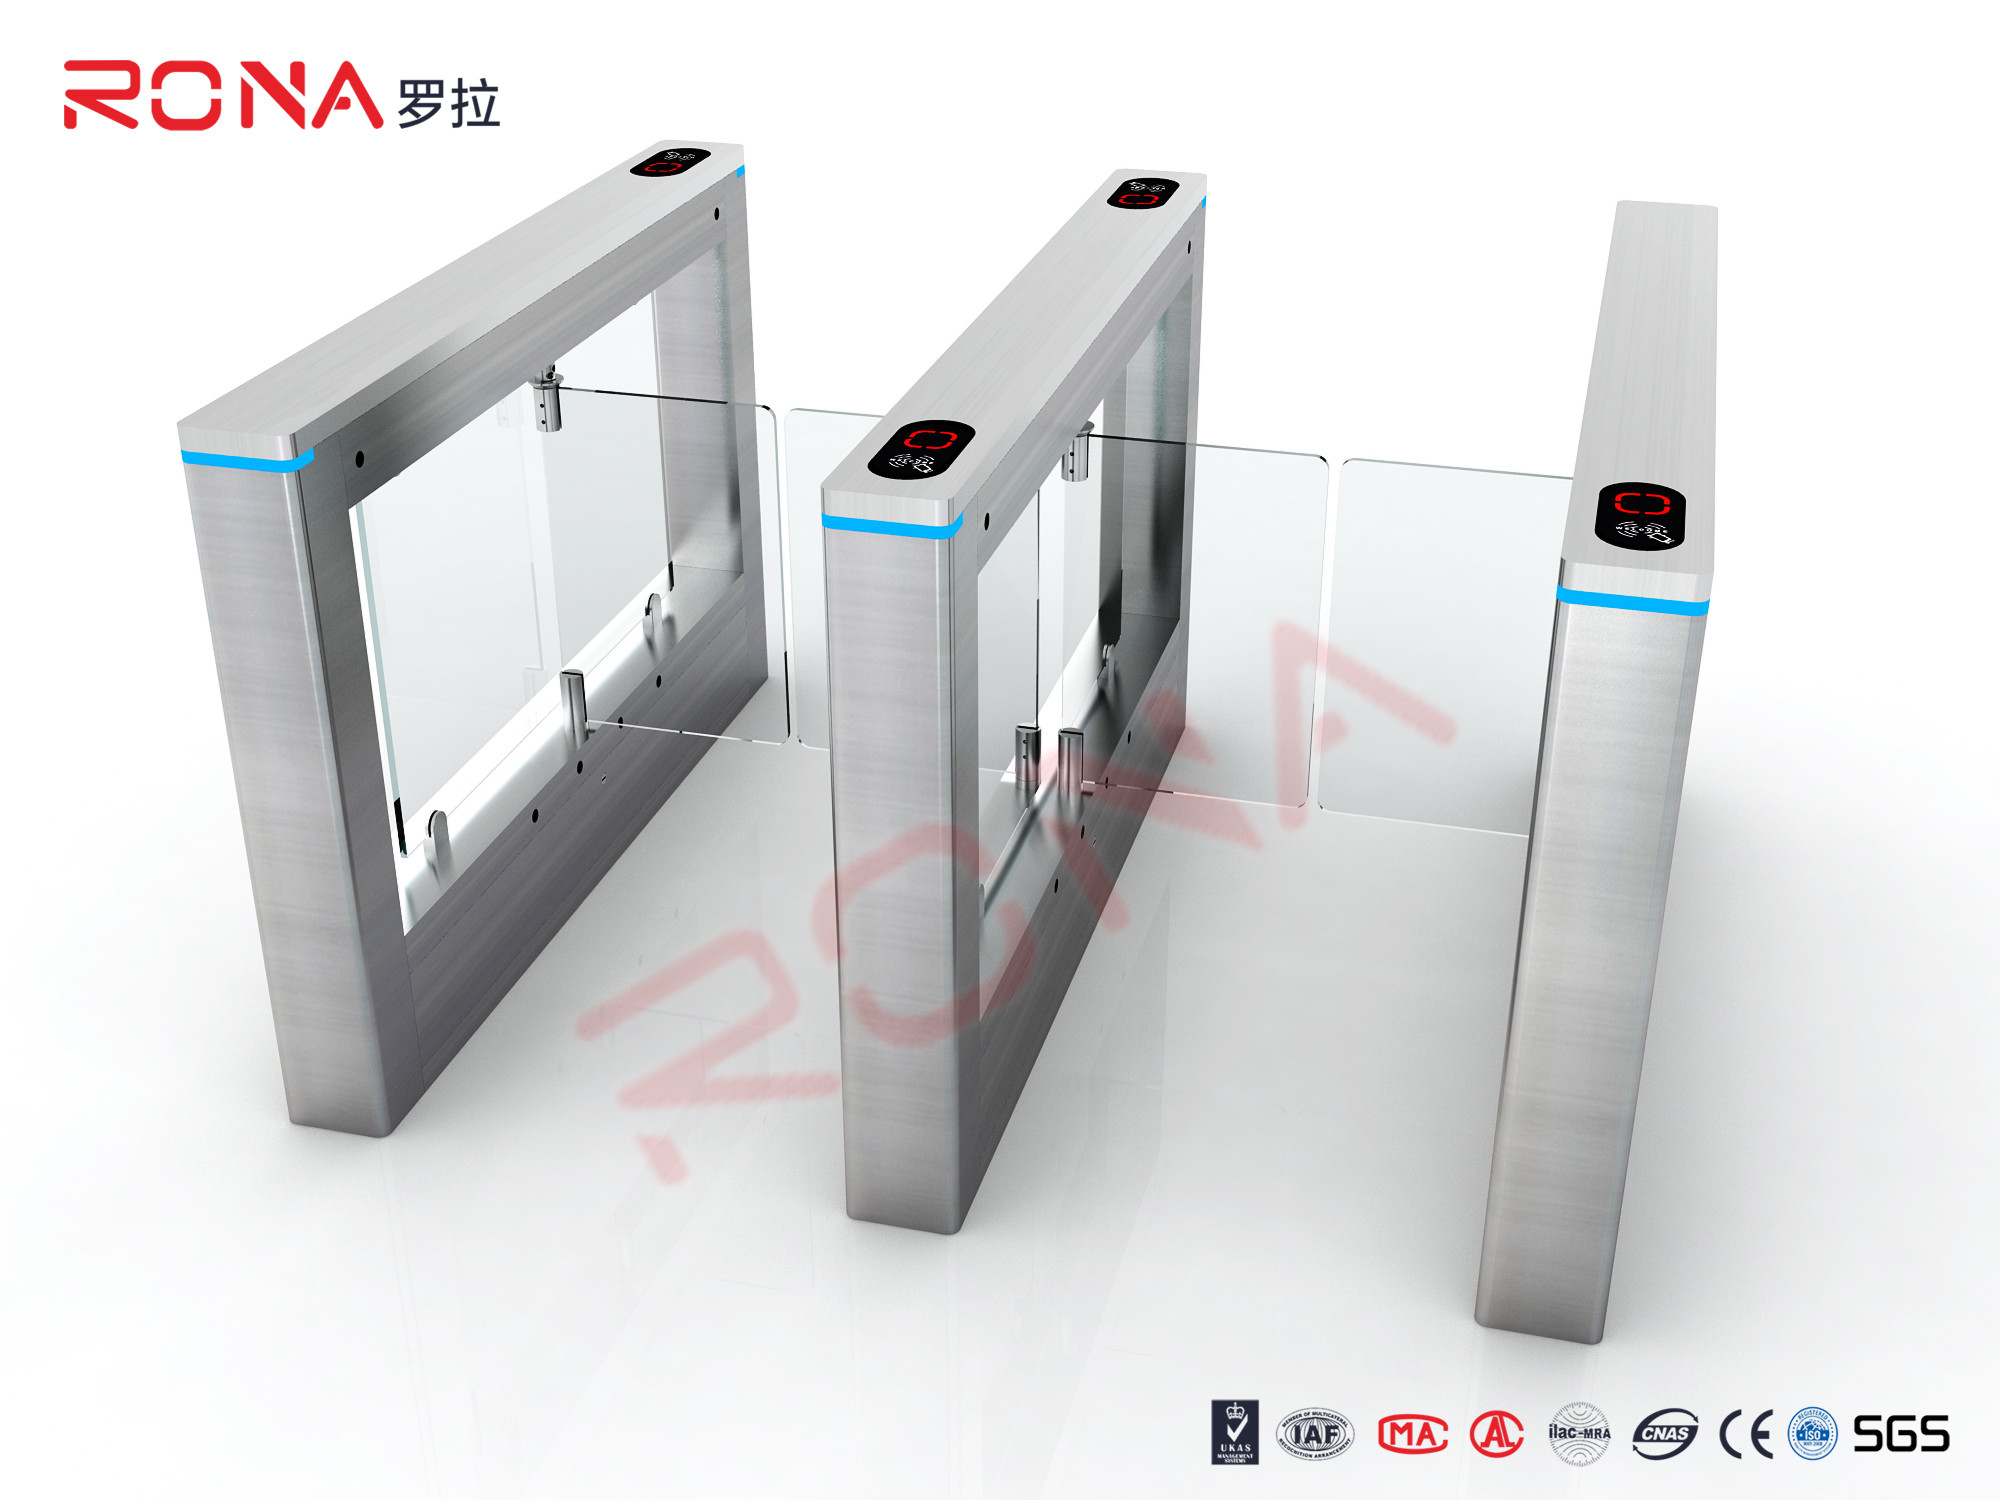  Access Management Slim Turnstile Automatic Swing Gates With Ticketing System Manufactures